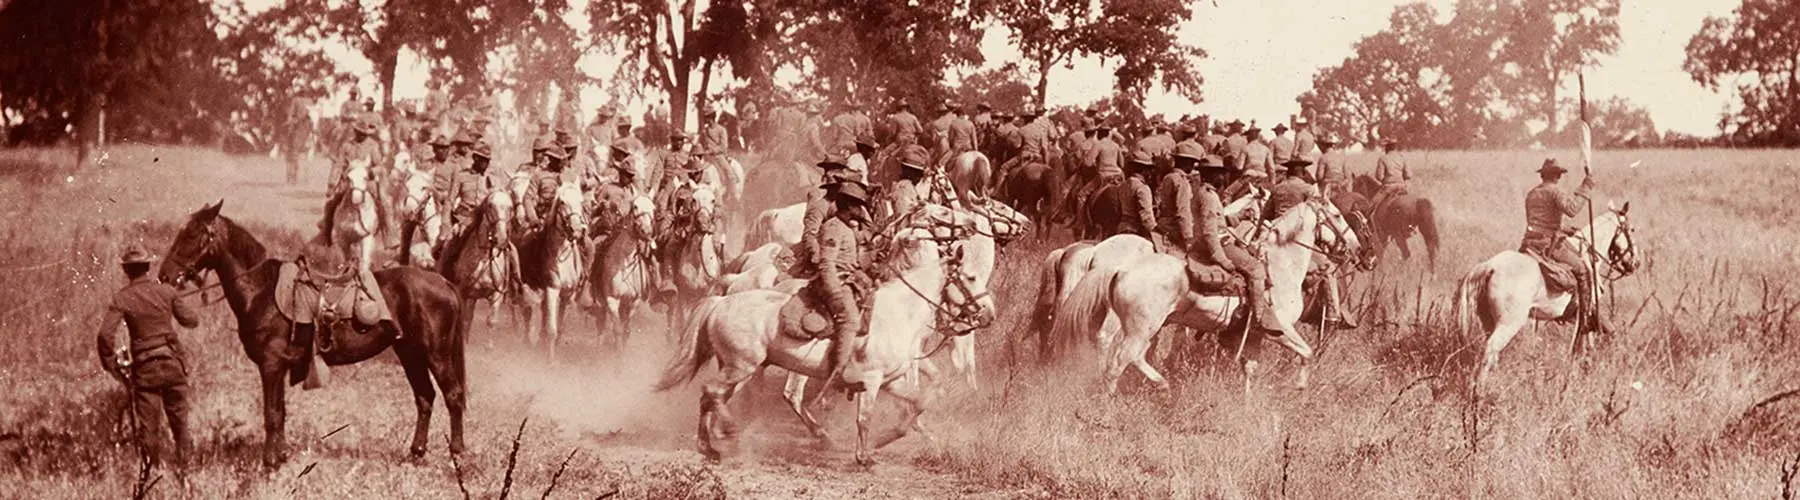 b/w photo of 9th Cavalry buffalo soldiers on horses